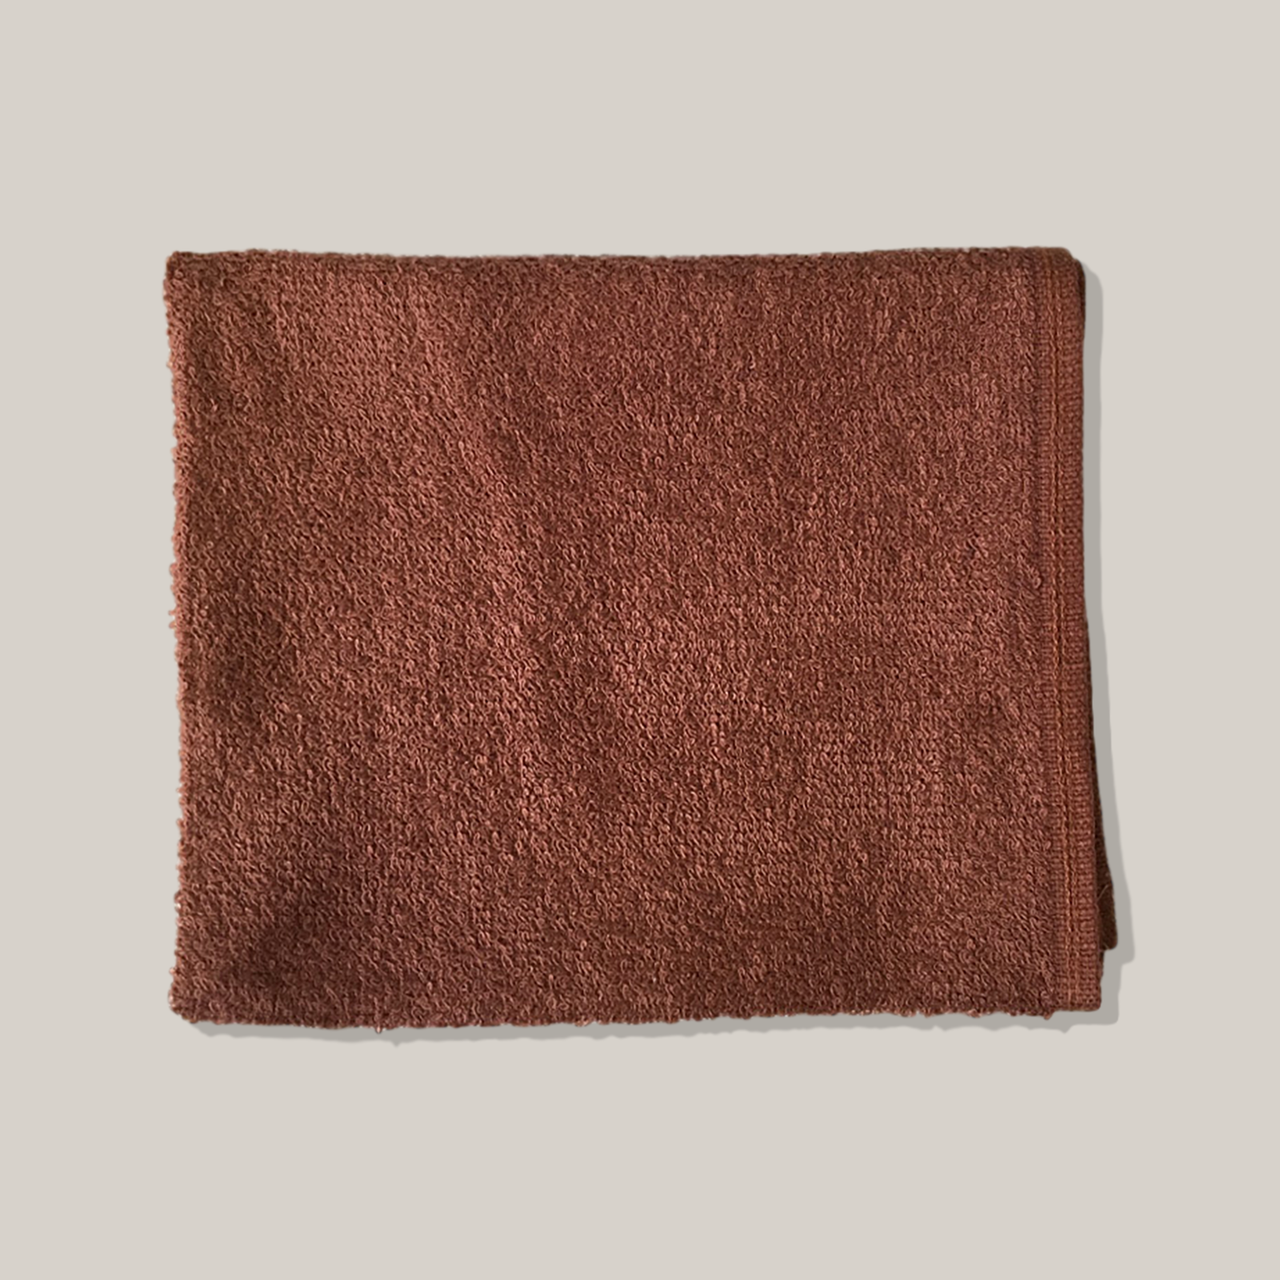 Dannyco (12/pk) Brown Cotton Towels Stain Resistant 